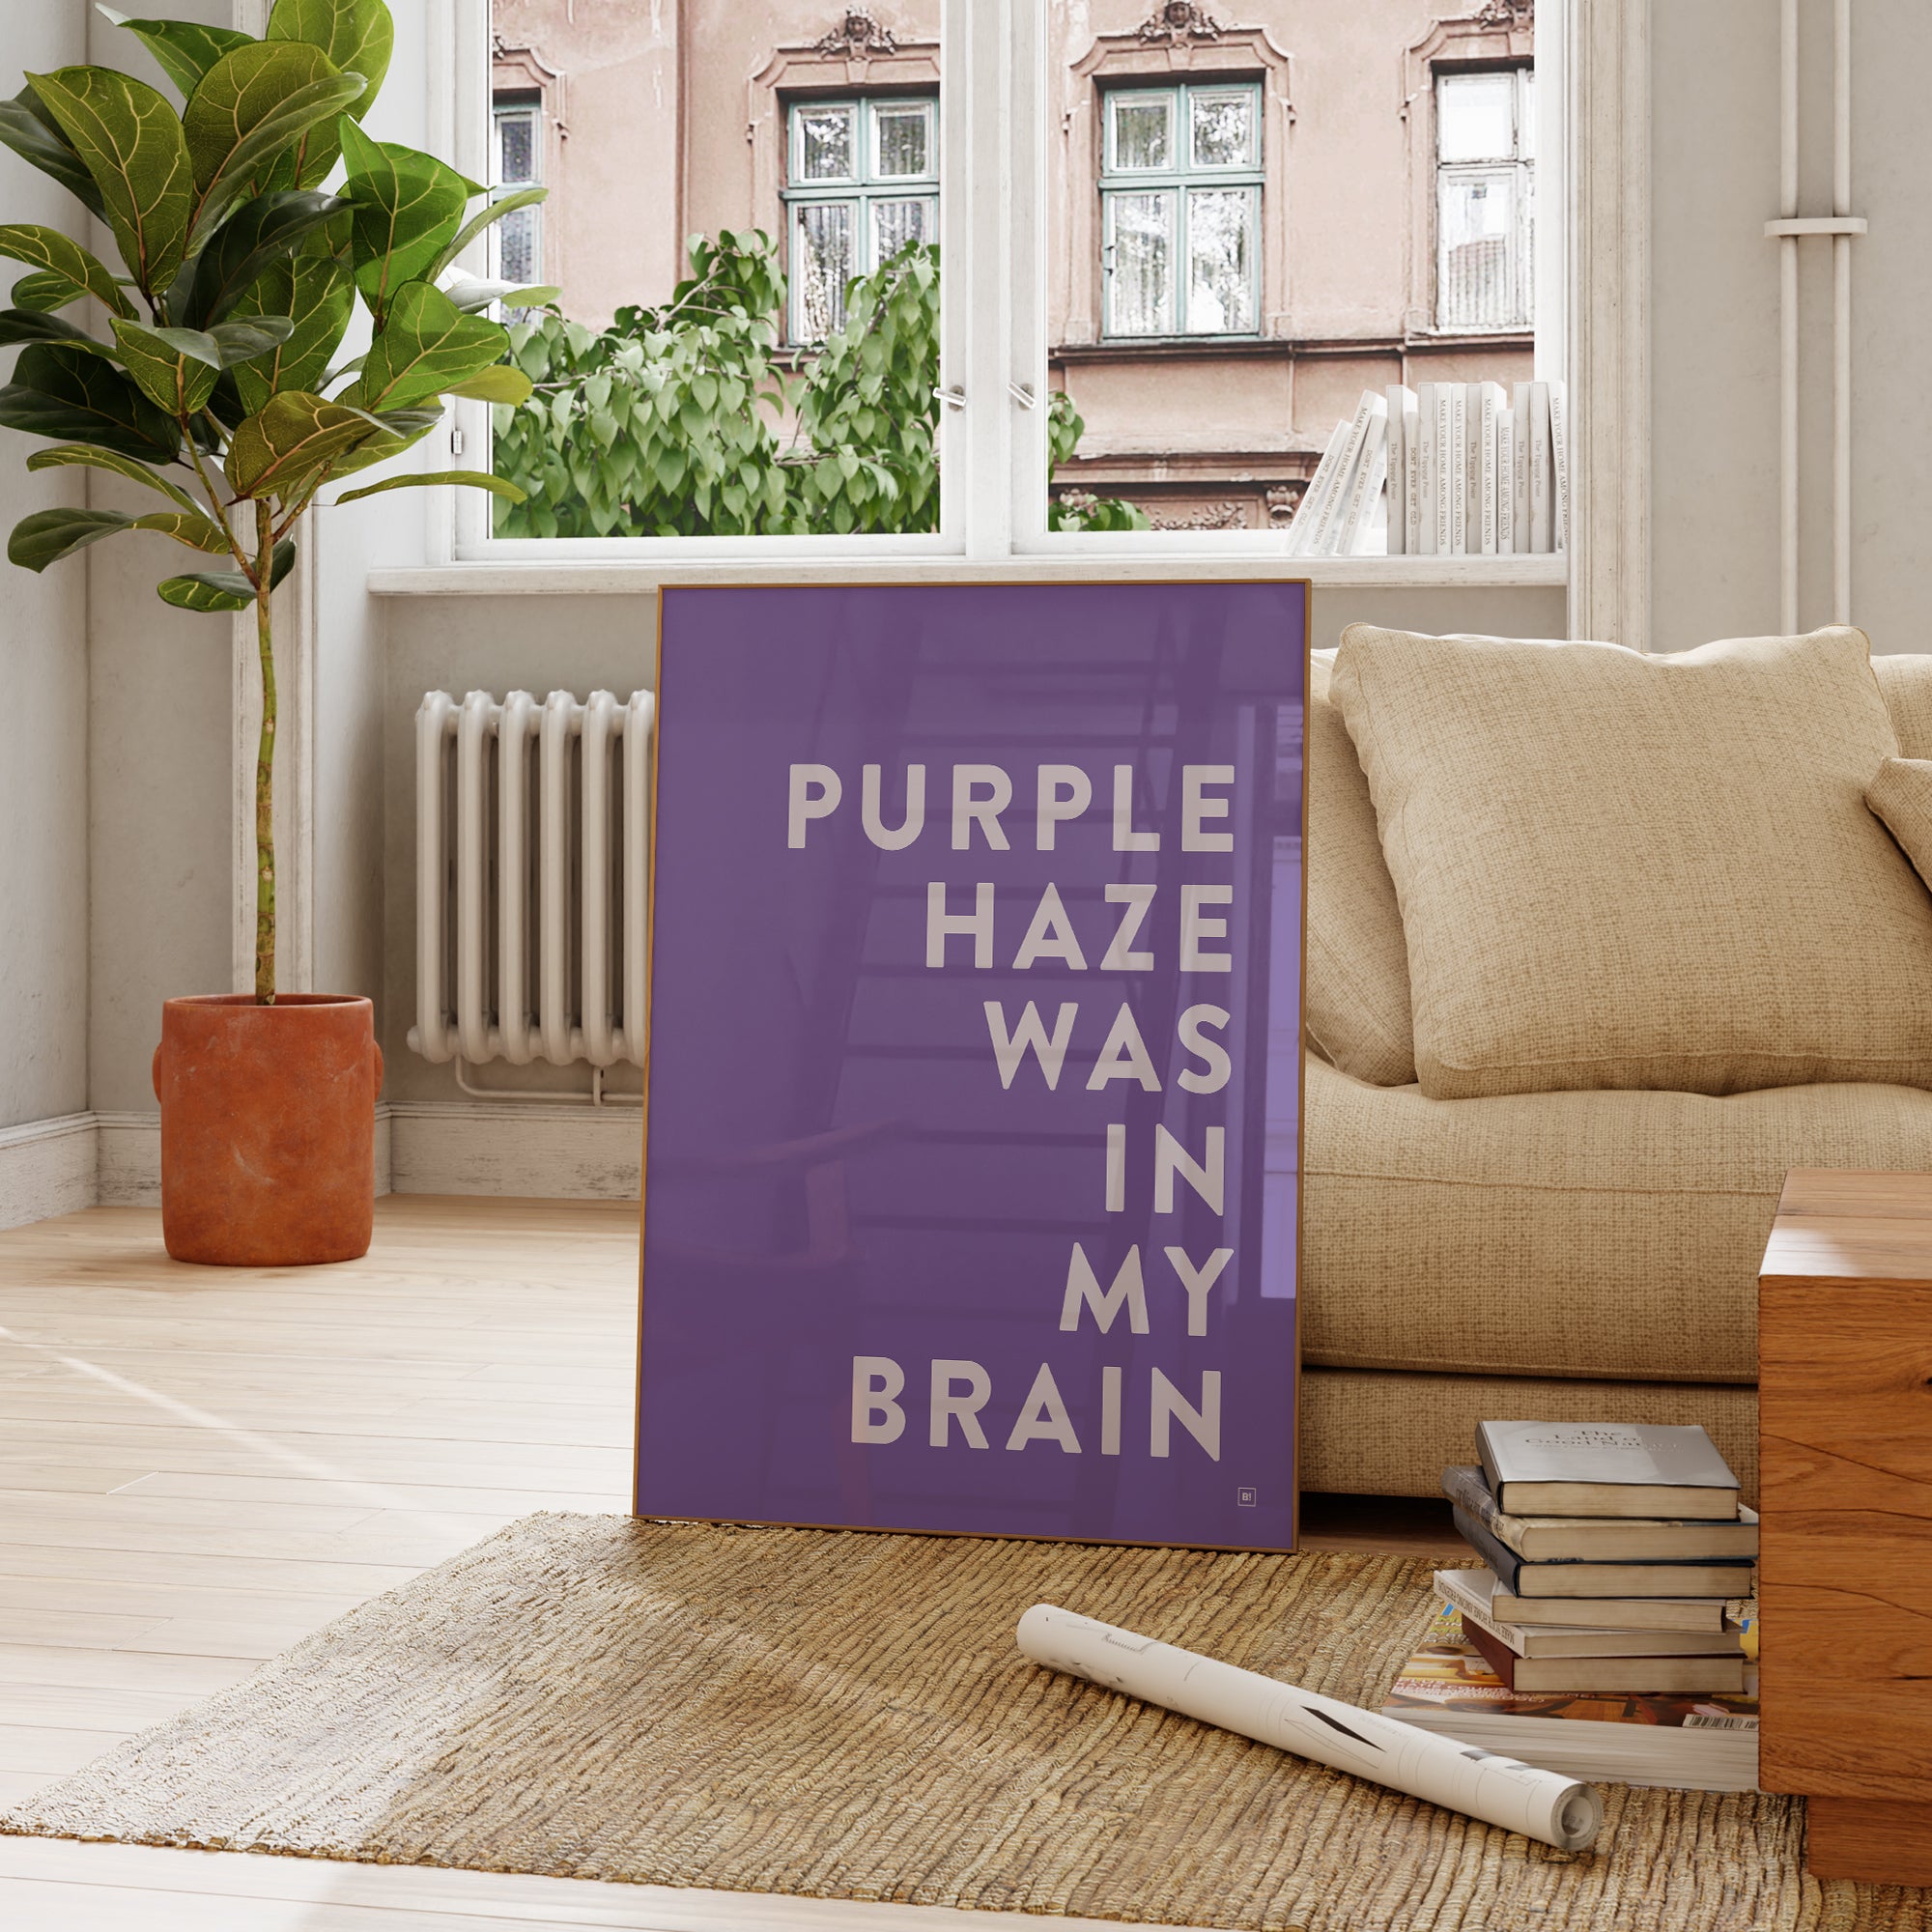 Be inspired by our Jimi Hendrix "Purple Haze Was In My Brain" lyric art print! This artwork was printed using the giclée process on archival acid-free paper and is presented in a French living room, capturing its timeless beauty in every detail.